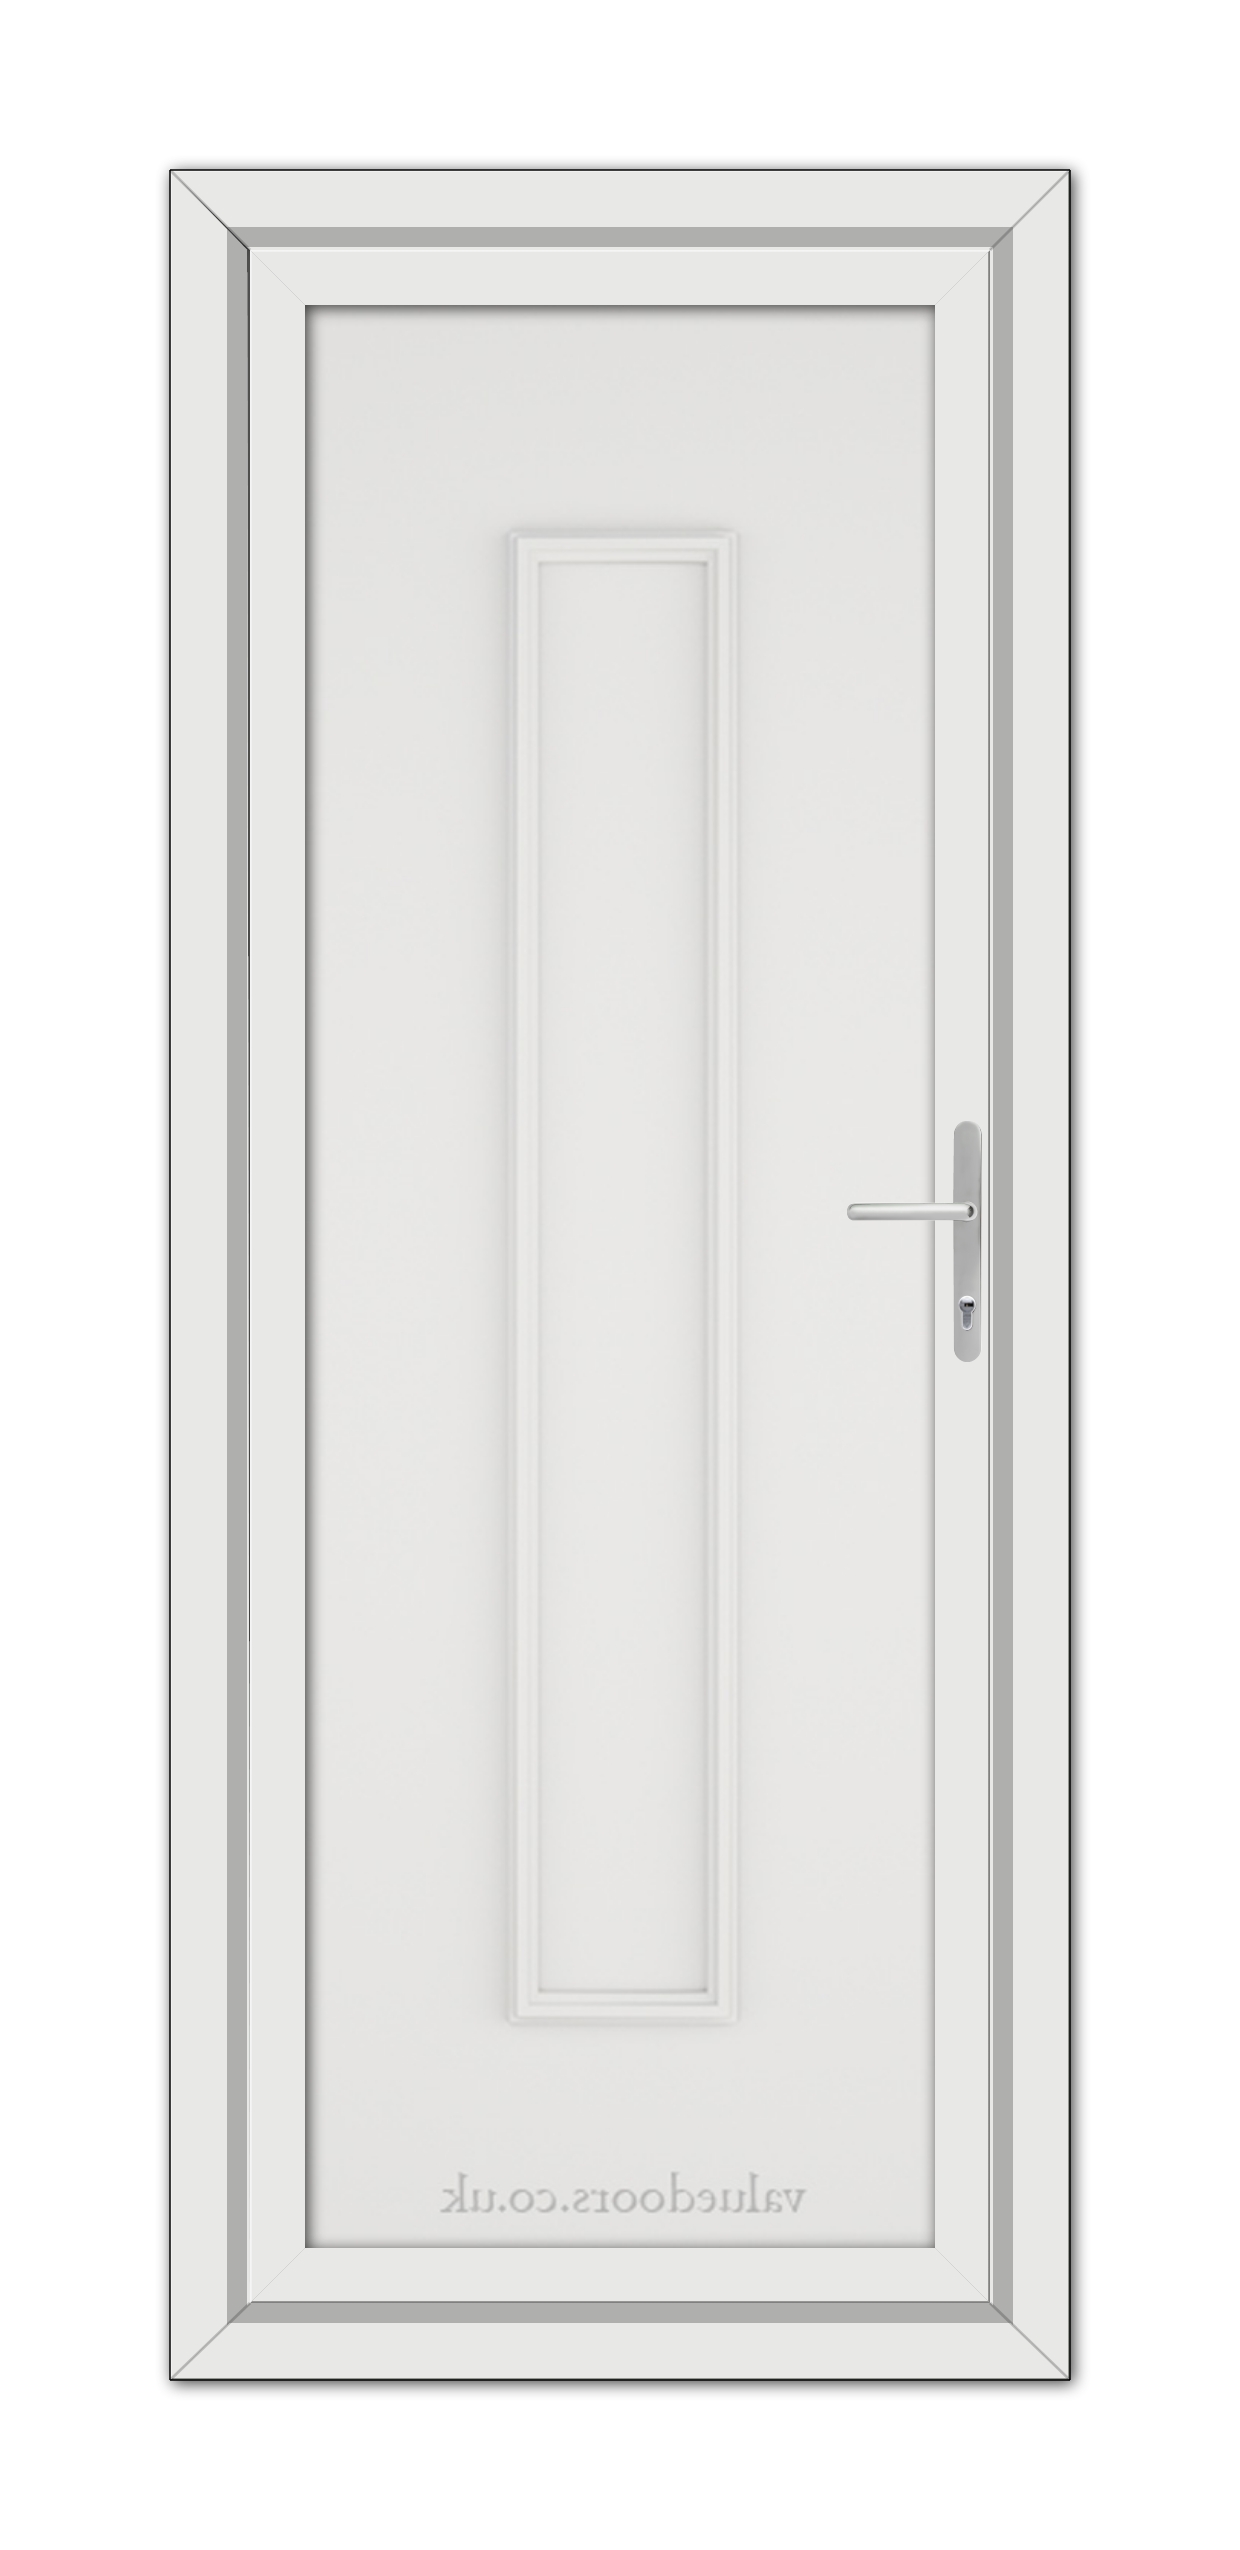 White Rome Solid uPVC Door with a vertical rectangular panel and a silver handle, set within a simple frame.